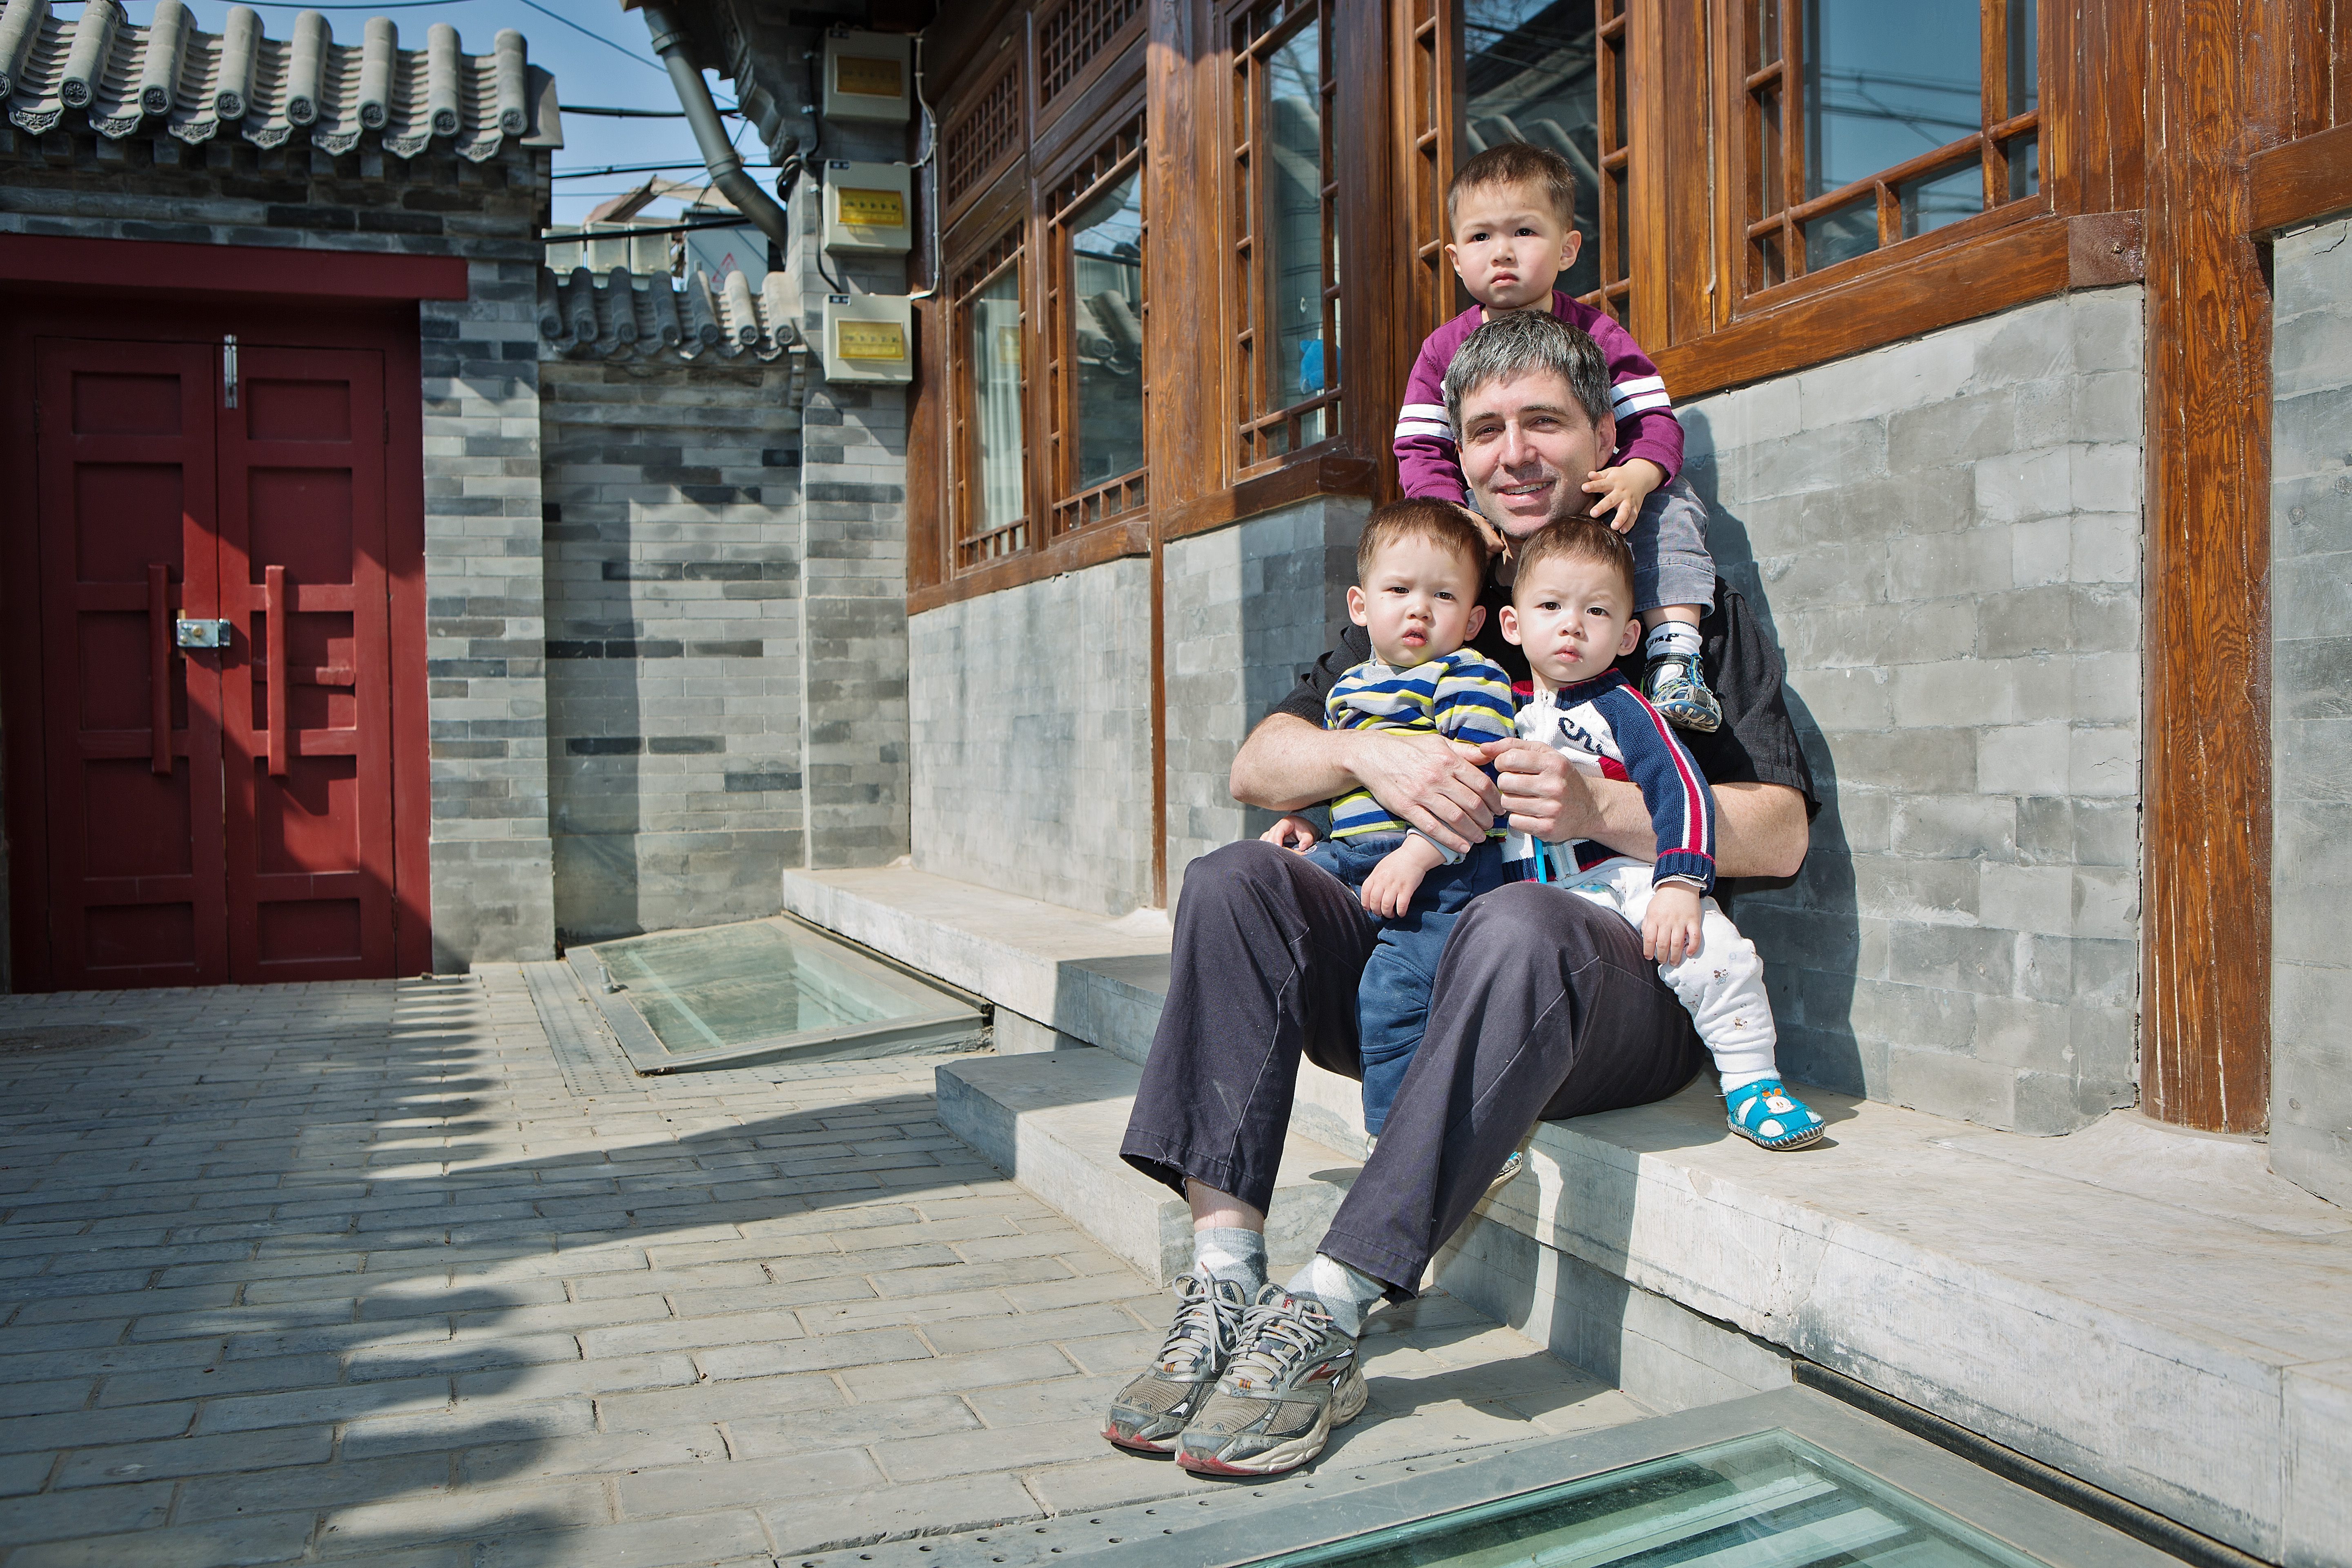 Craig Watts, Single Gay Father of Three, Talks About His Life in Beijing